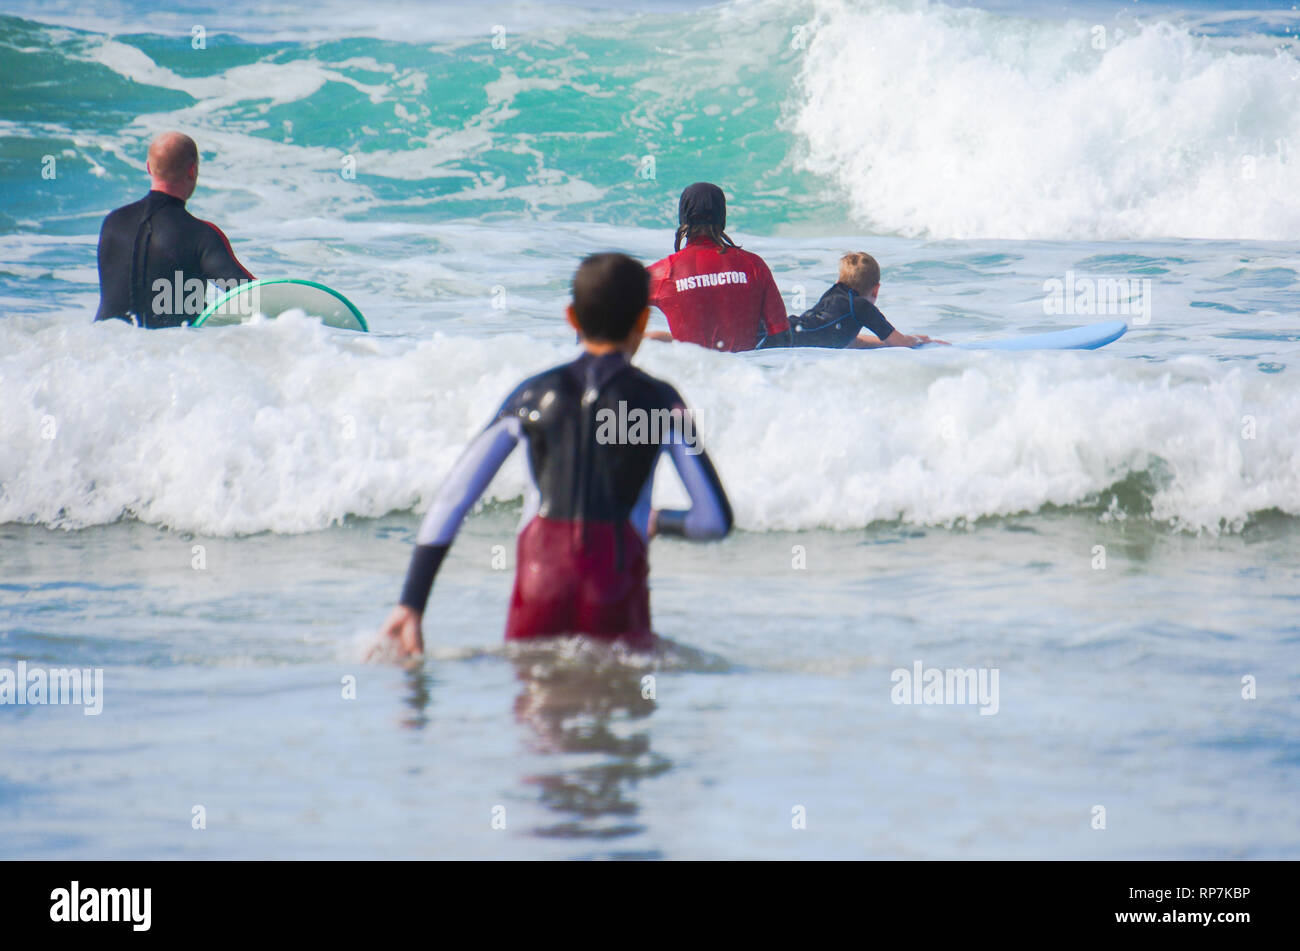 Beginner surfers learning to catch waves during surf lesson. Fun time during learn to surf lesson in the waves. Stock Photo